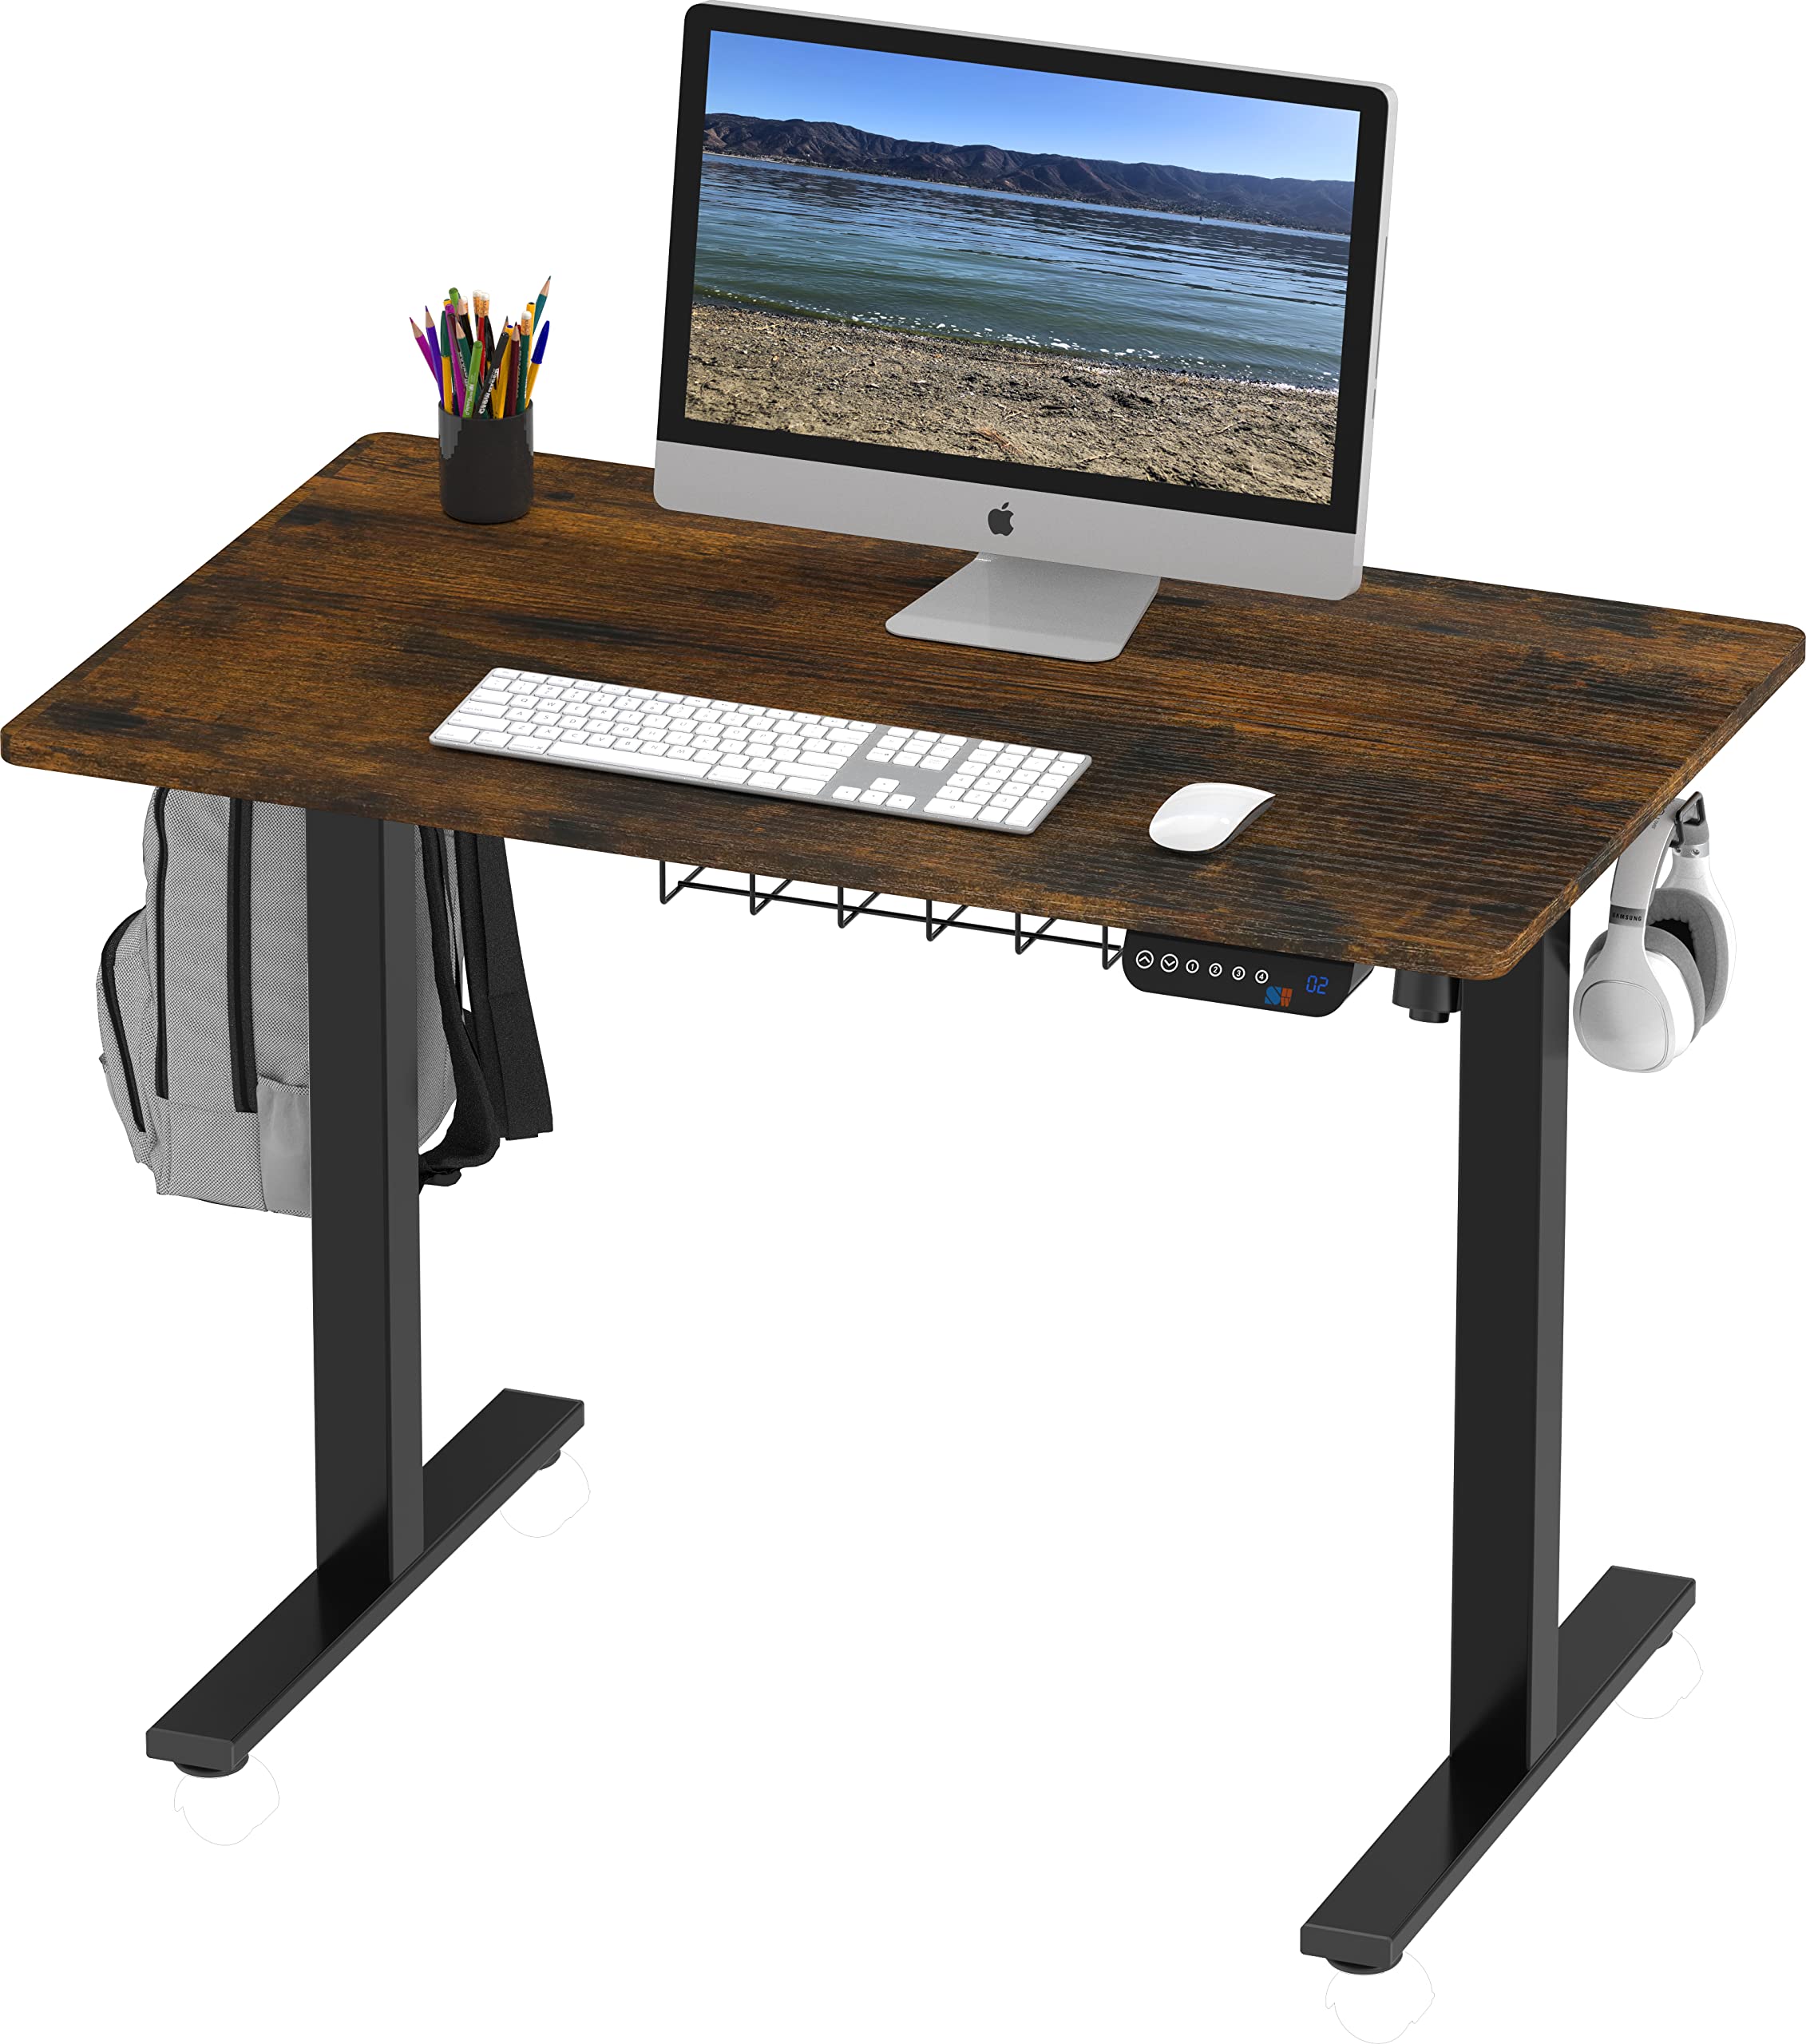 SHW Electric Height Adjustable Desk with Memory Preset, 40 x 24 Inches, Rustic Brown